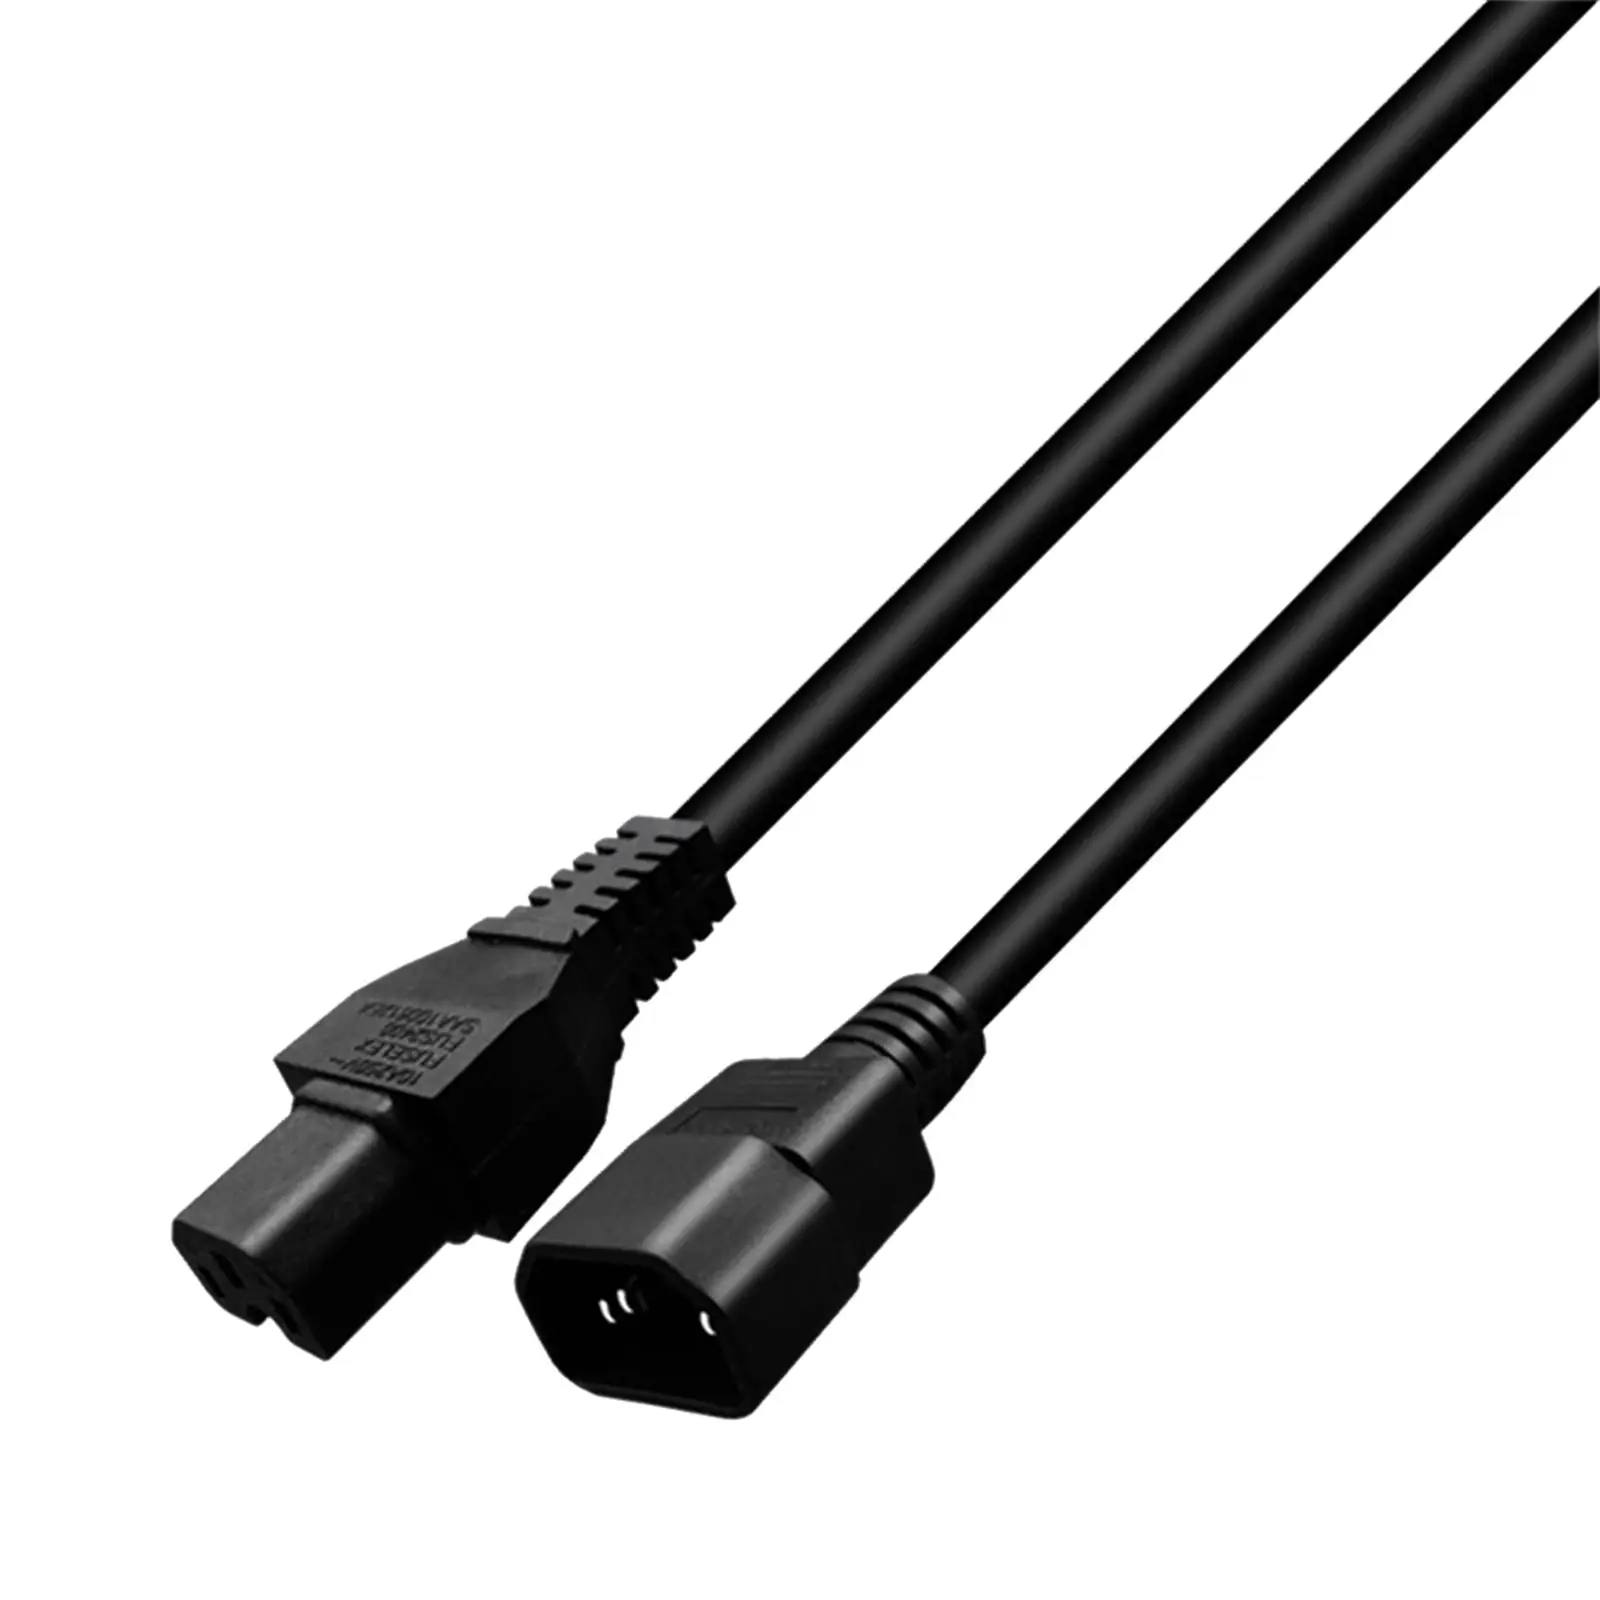 IEC320-C14 to IEC320-C15 Computer Power Extension Cord Black for Accessory